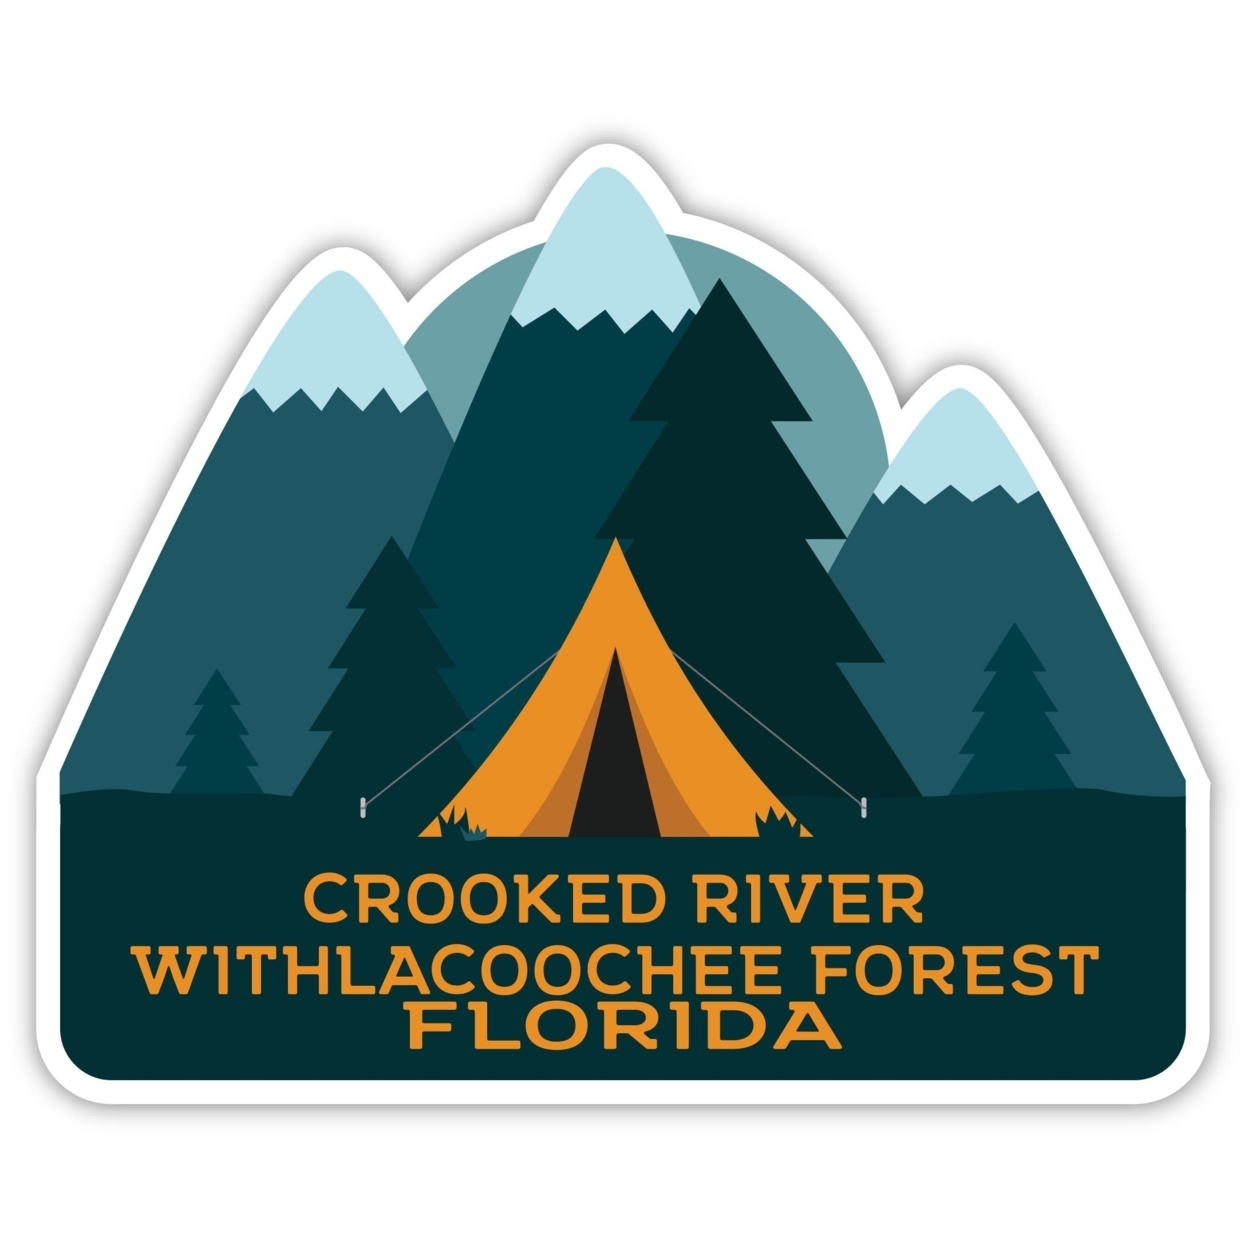 Crooked River Withlacoochee Forest Florida Souvenir Decorative Stickers (Choose Theme And Size) - Single Unit, 2-Inch, Tent